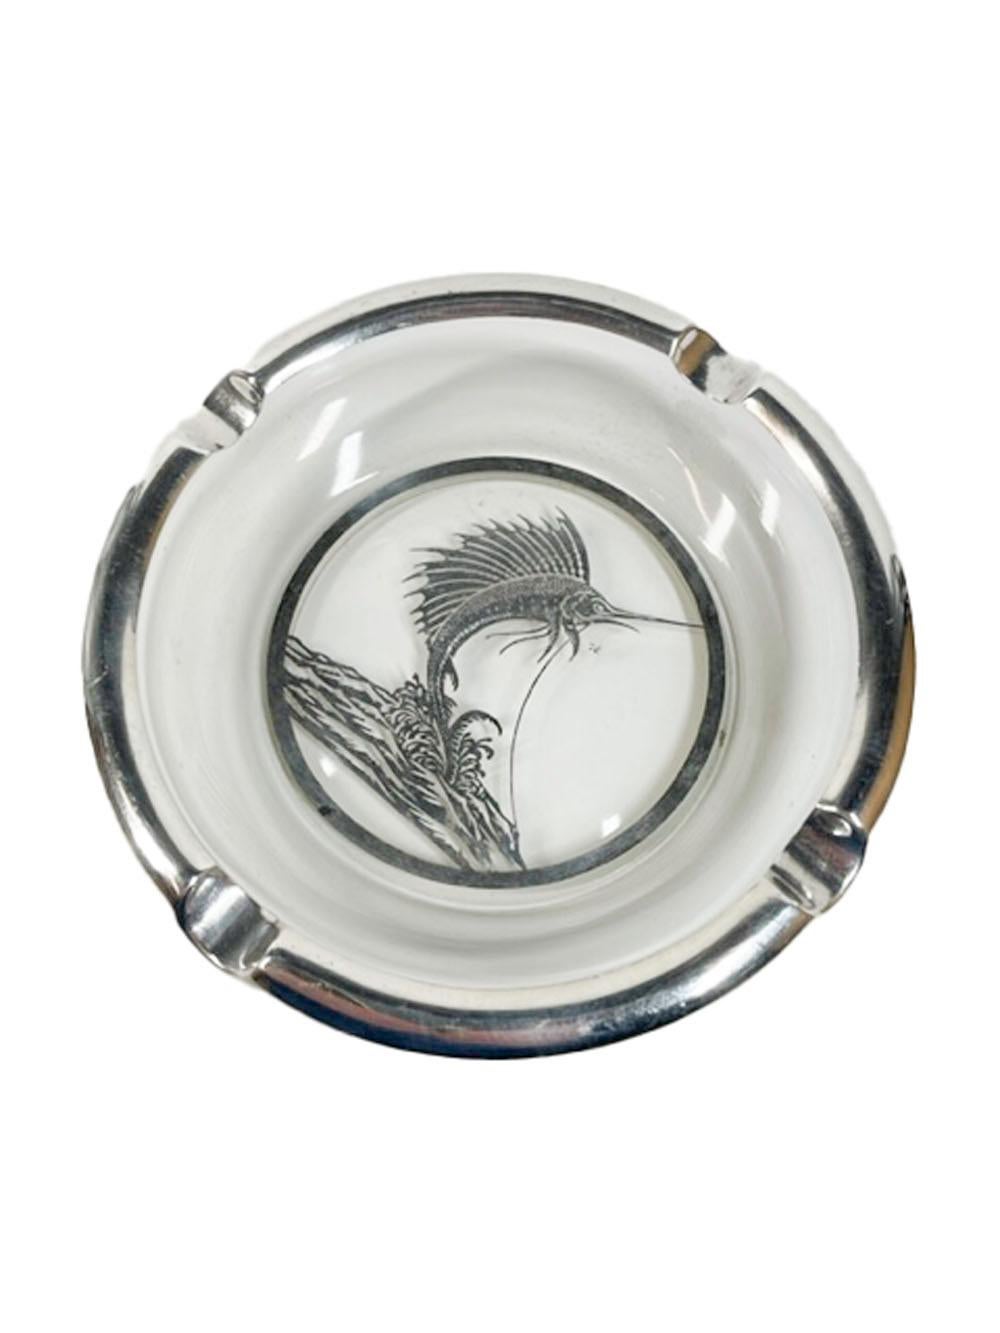 Silver overlay ashtray by Rockwell Silver Company with a silver overlay four divot rim centering a hooked leaping marlin / sailfish over waves.